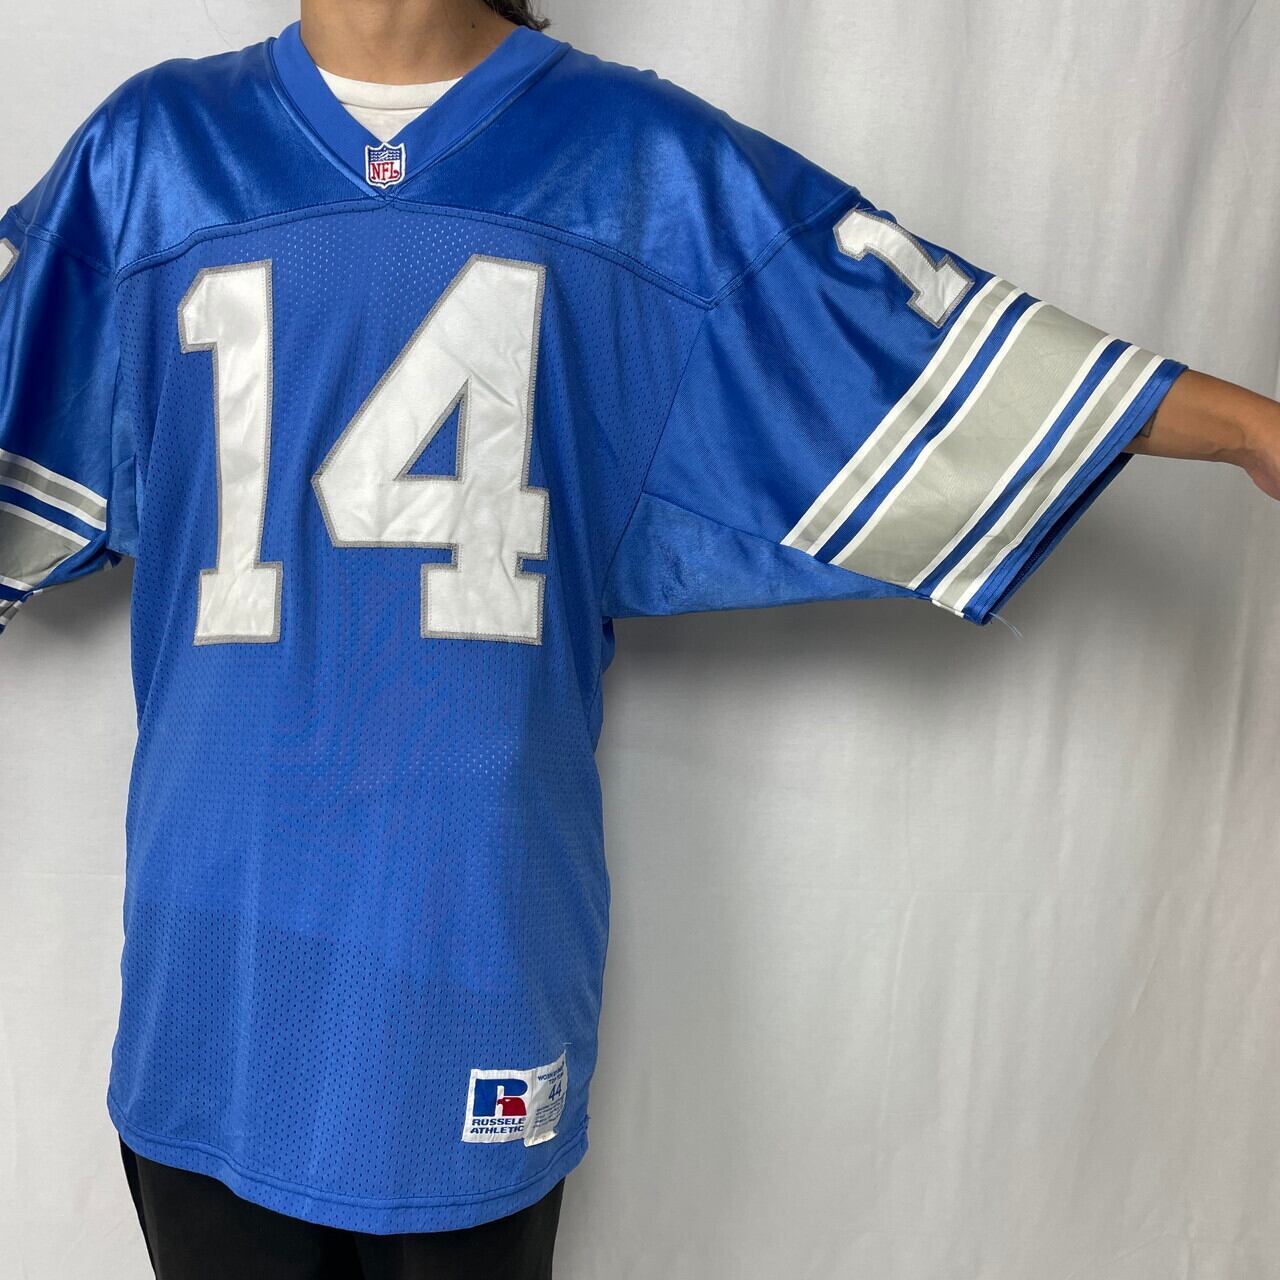 USA製 RUSSELL ATHLETIC ラッセルアスレチック NFL DUFFY 14